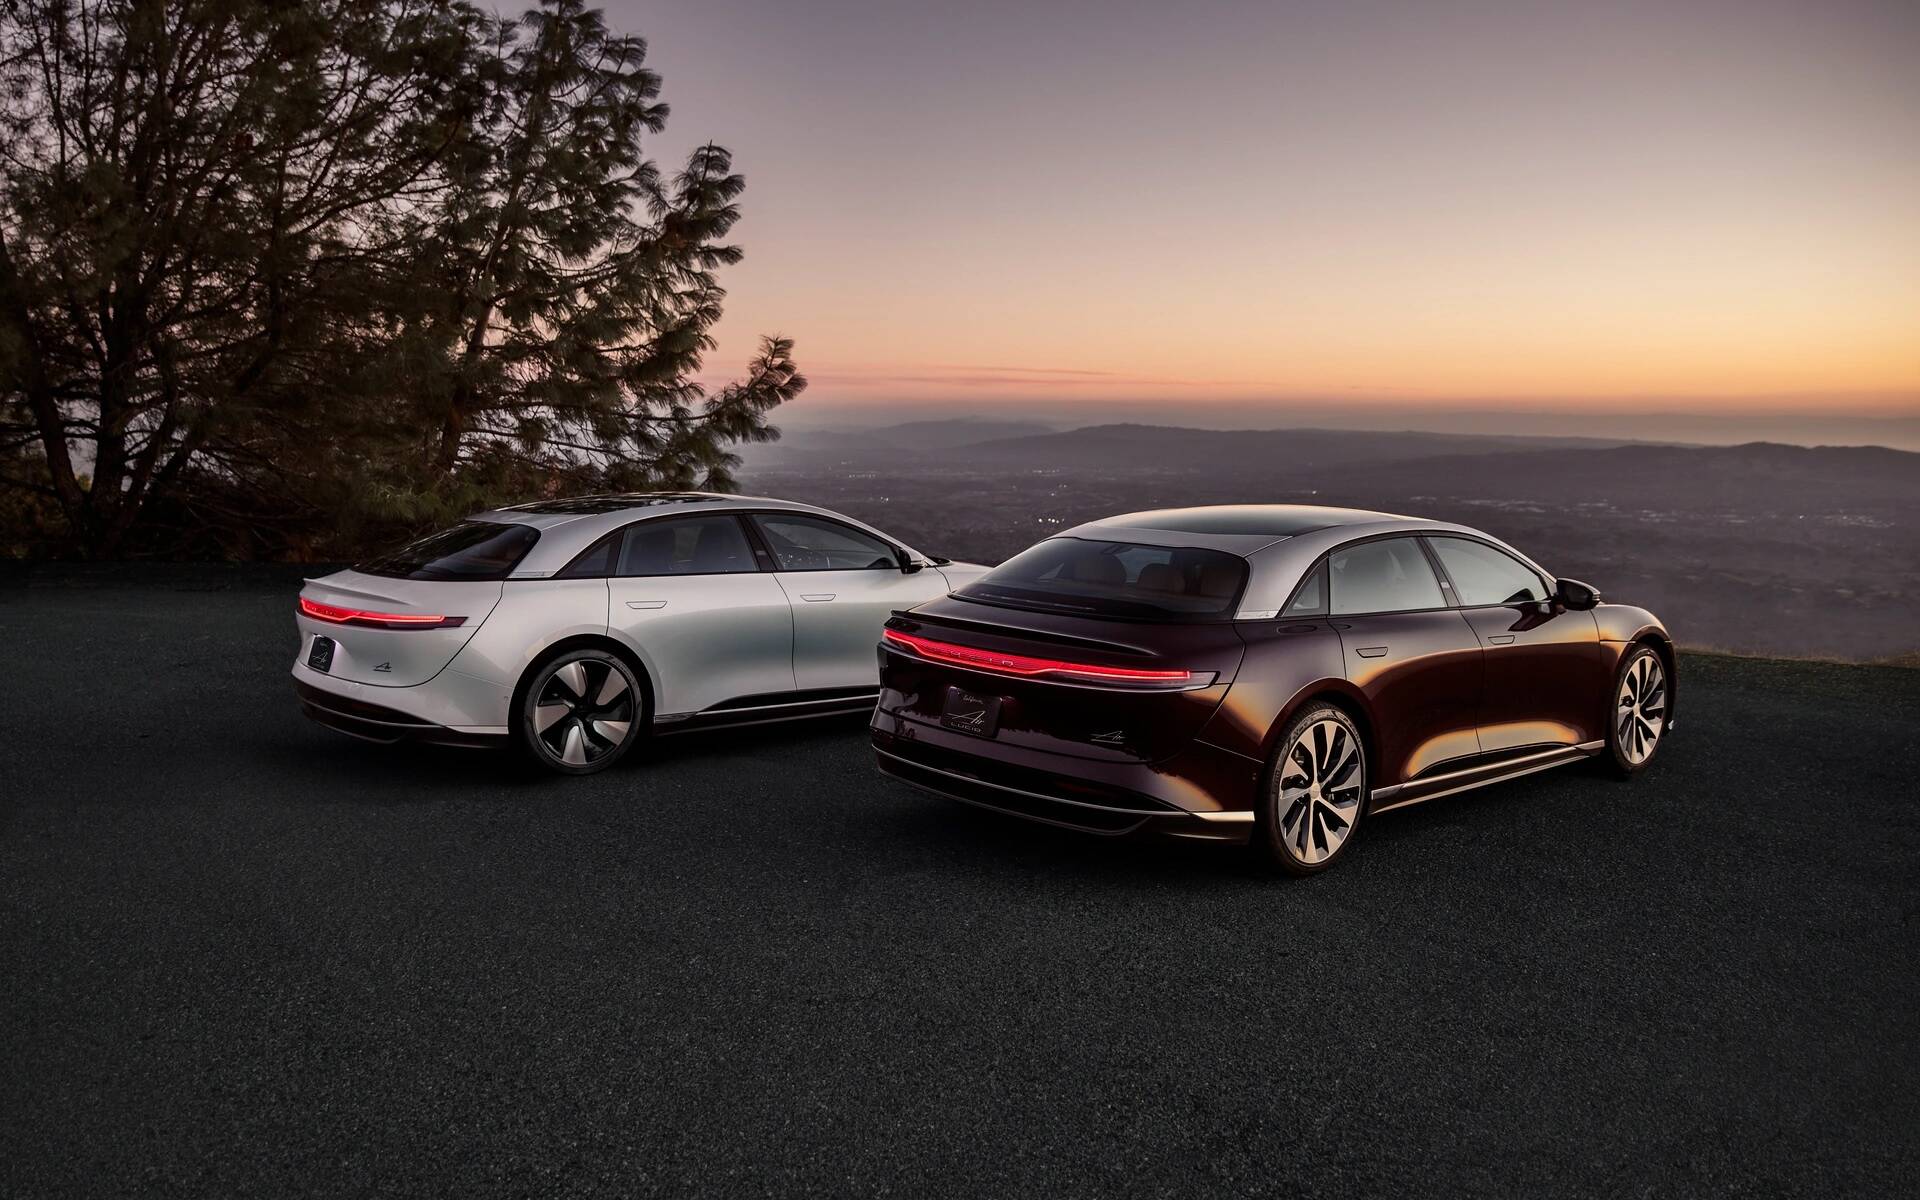 Rear-angled image of two Lucid Air performance luxury sedans.